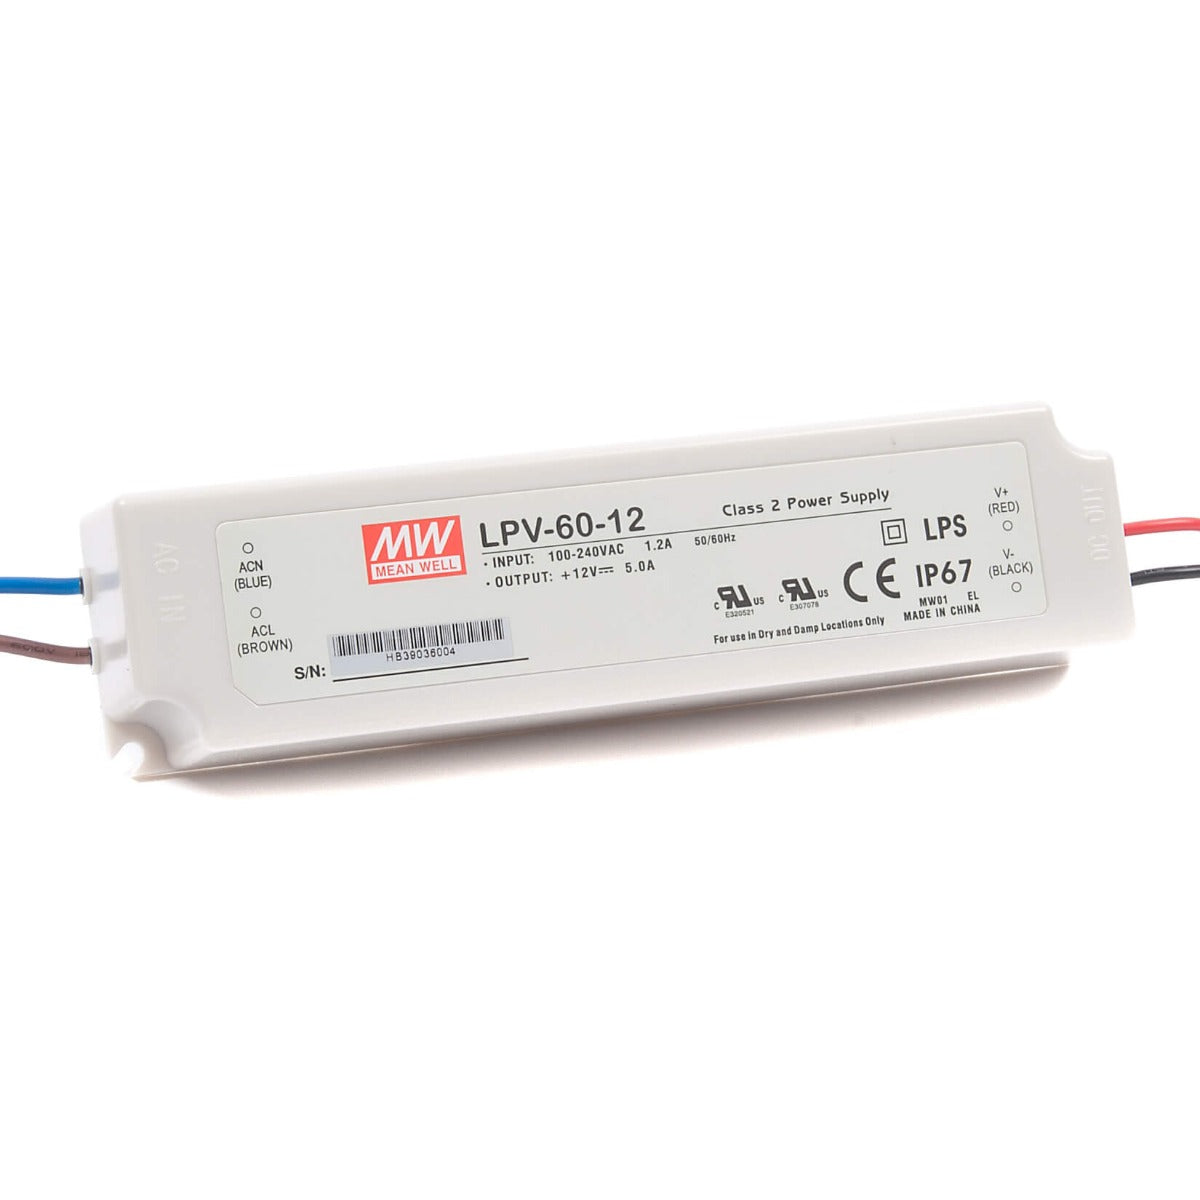 View 60w Meanwell LED Driver information